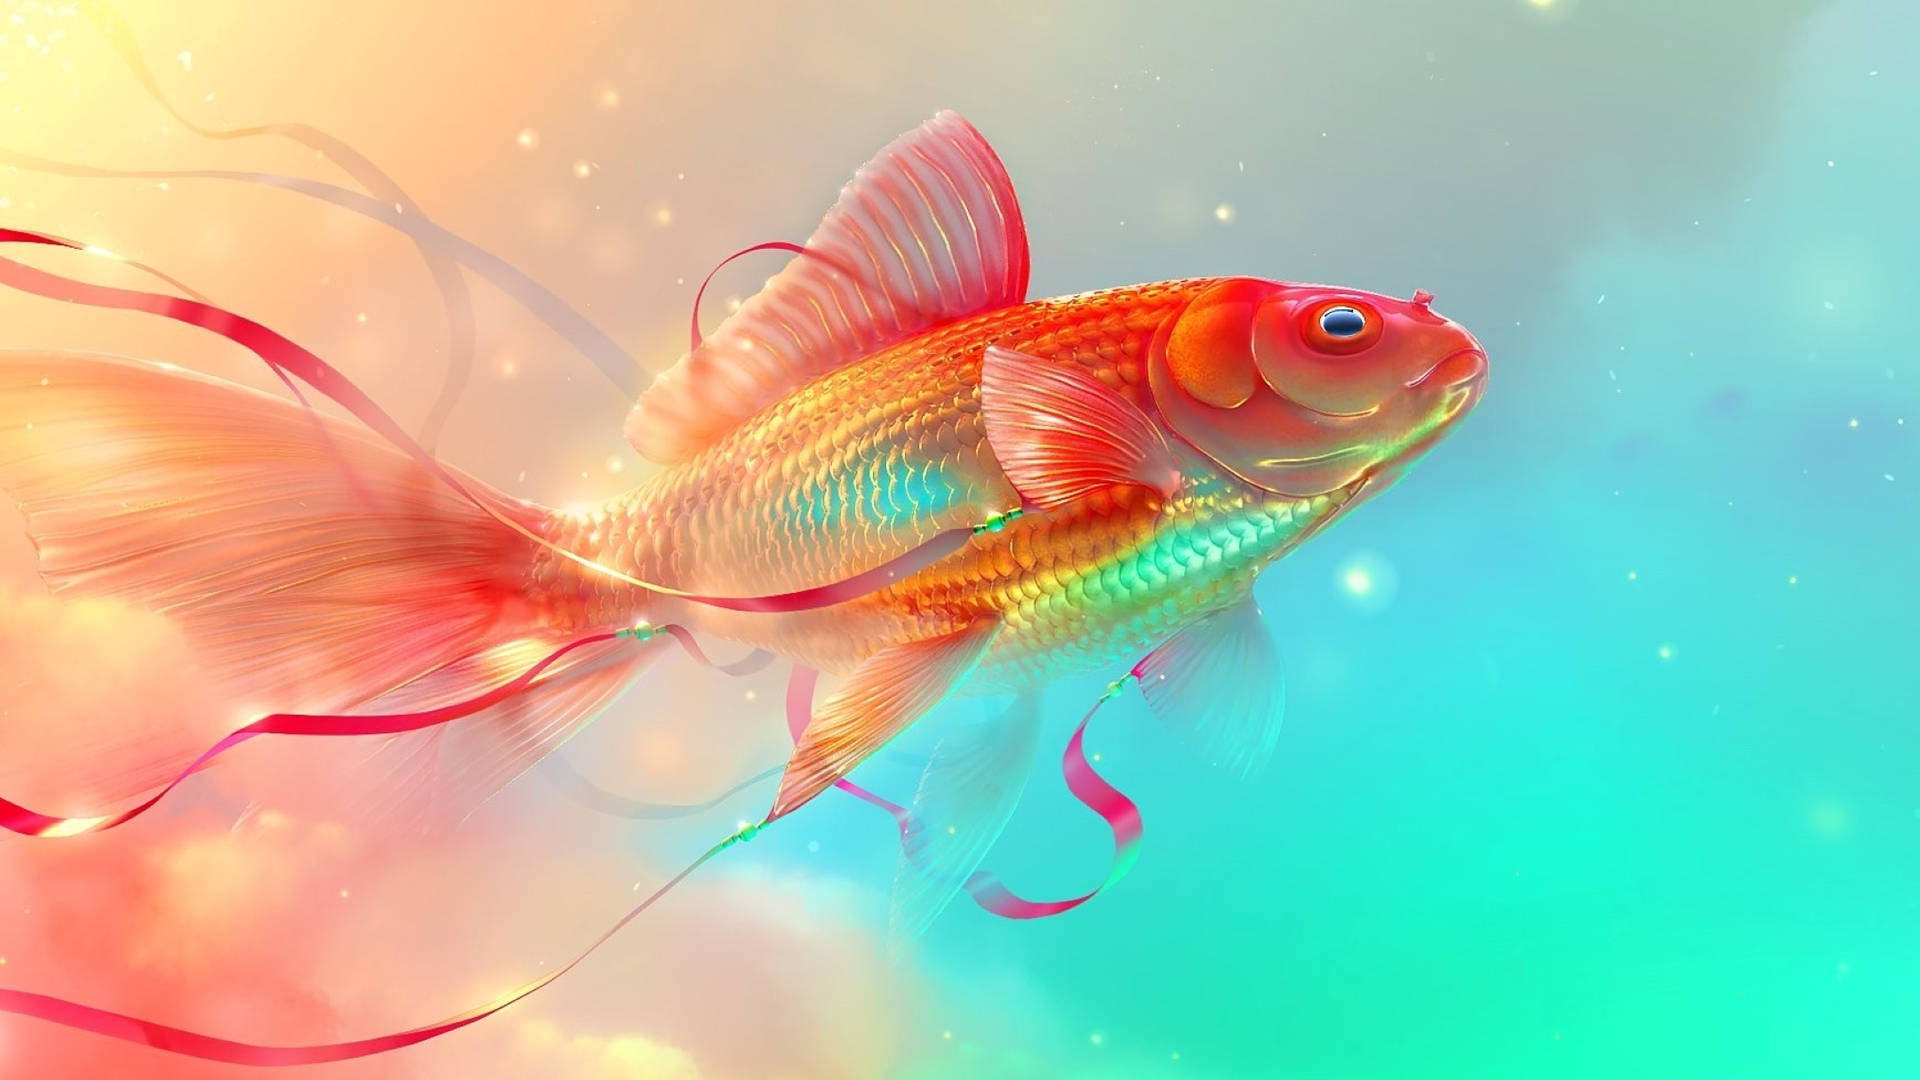 100+] Goldfish Wallpapers for FREE 